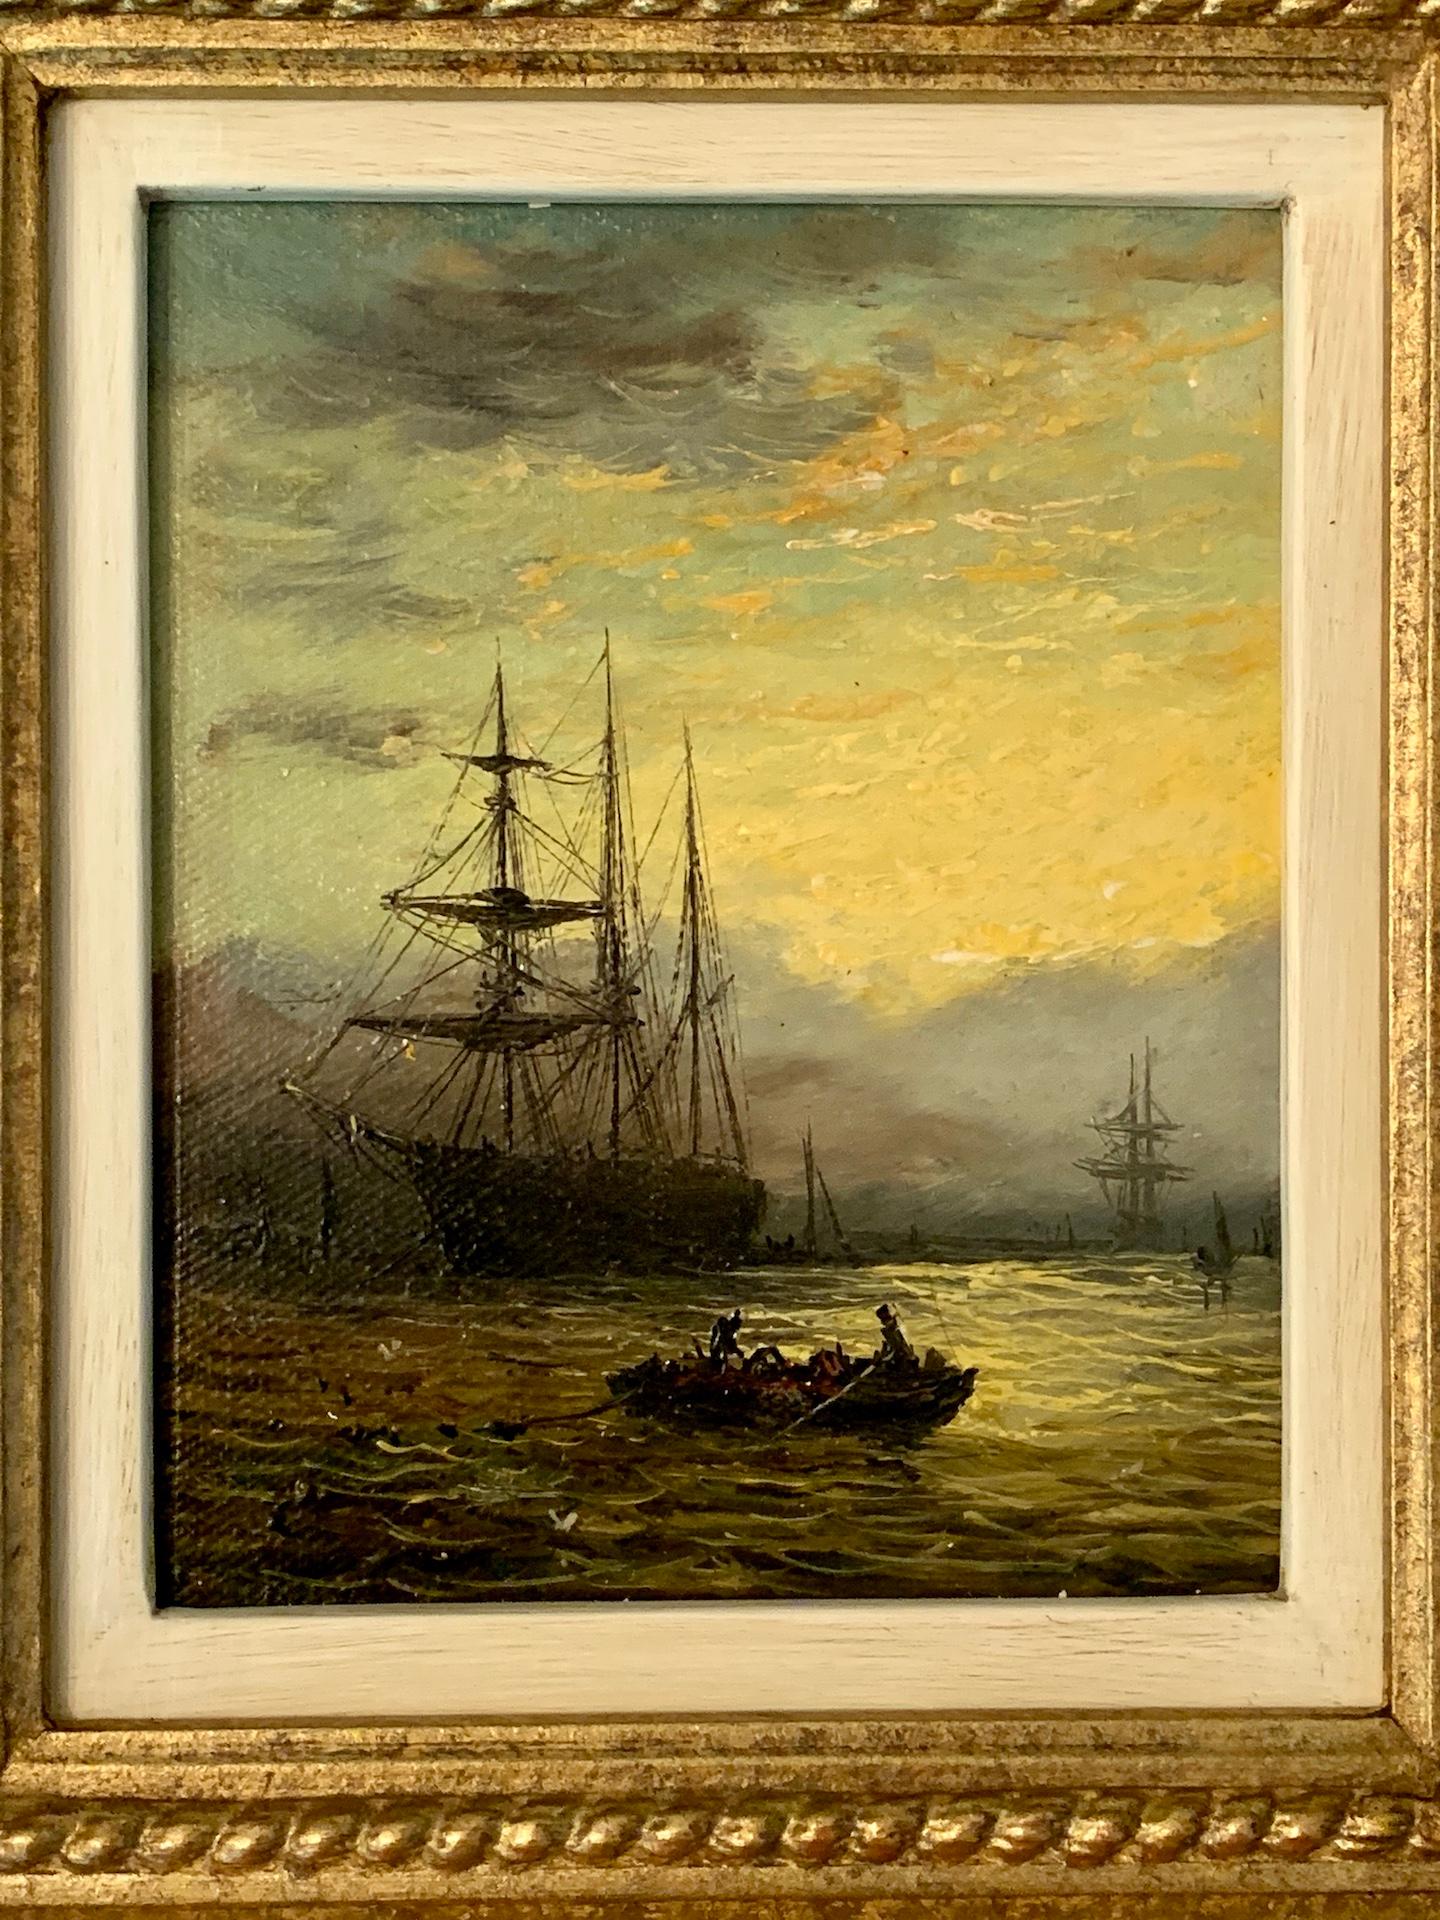 Antique Victorian, Impressionist 19th century English oil, Fishings boat at Sea - Painting by Adolphus Knell